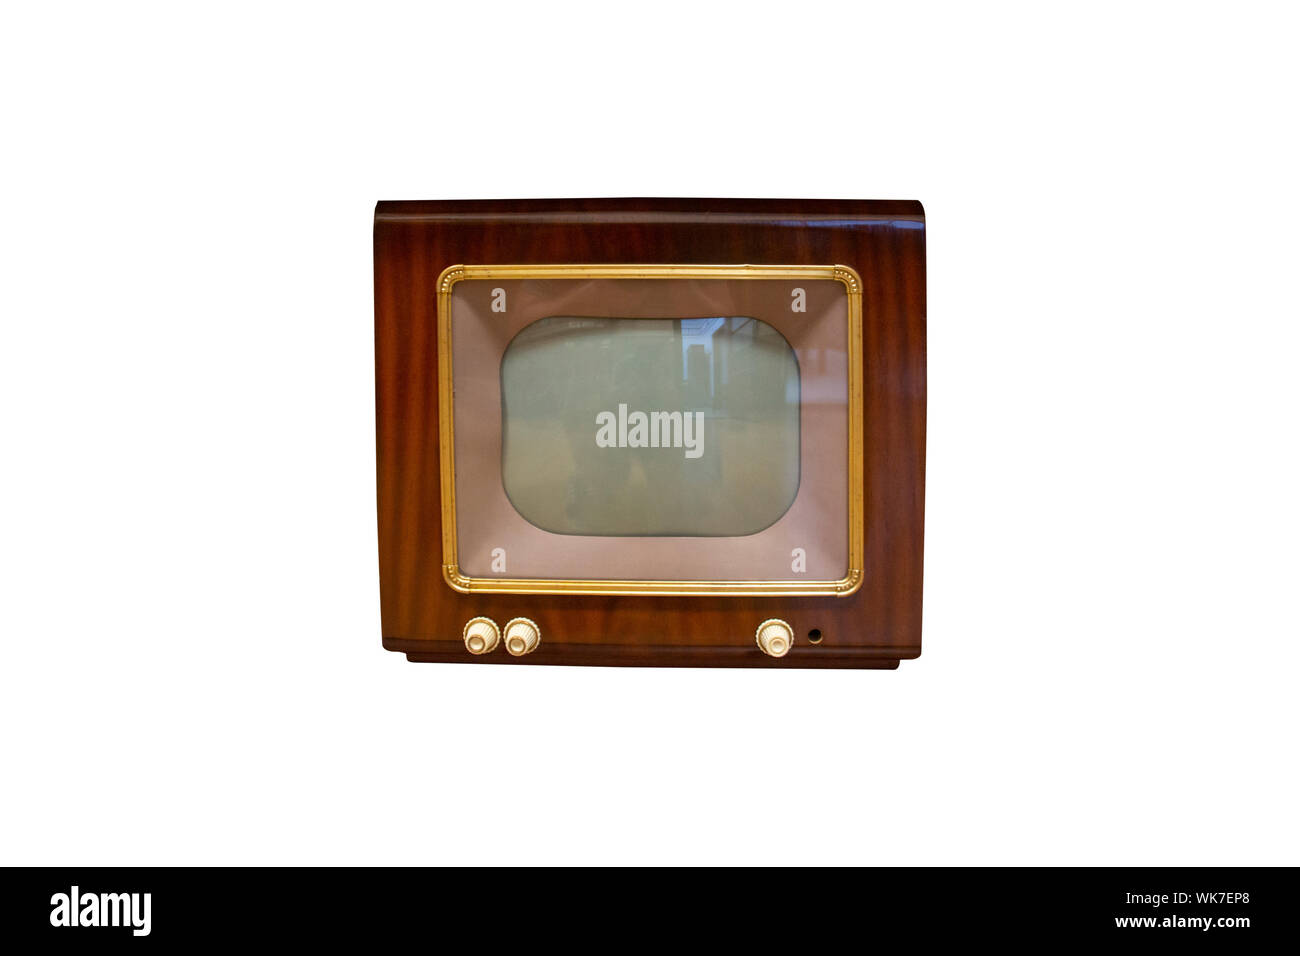 Vintage Television  Old Tv Isolated on White Background. Old-fashioned Television Close Up. Old Grungy Vintage Tv Retro Technology. Stock Photo